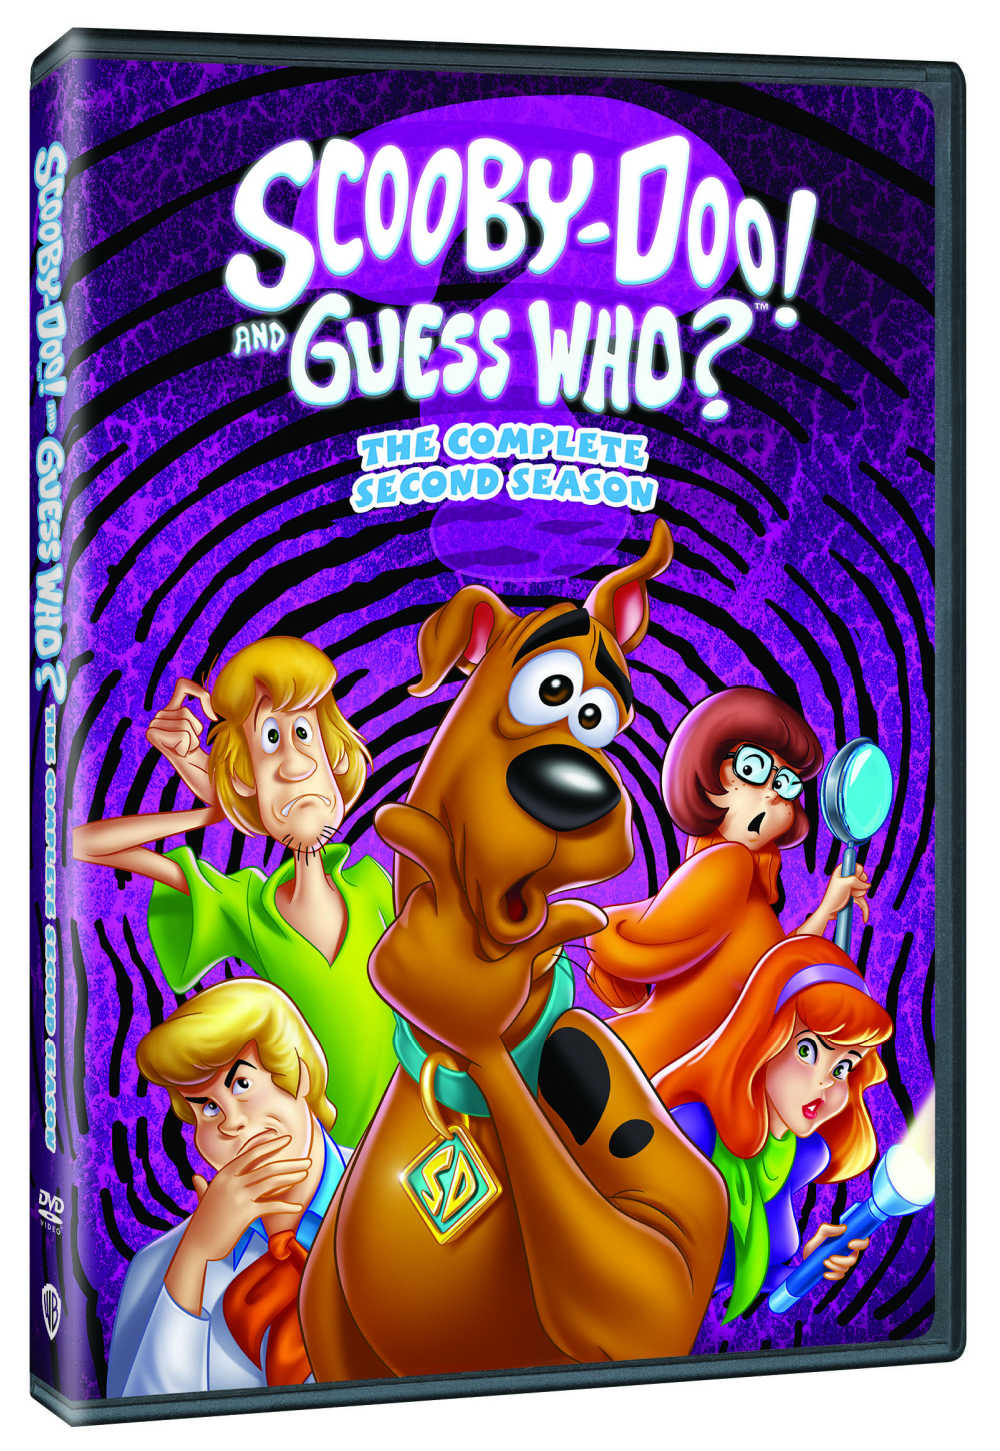 There is a whole lot of mystery and fun packed into the Scooby Doo and Guess Who Season 2 DVD Set, so add it to your collection now.